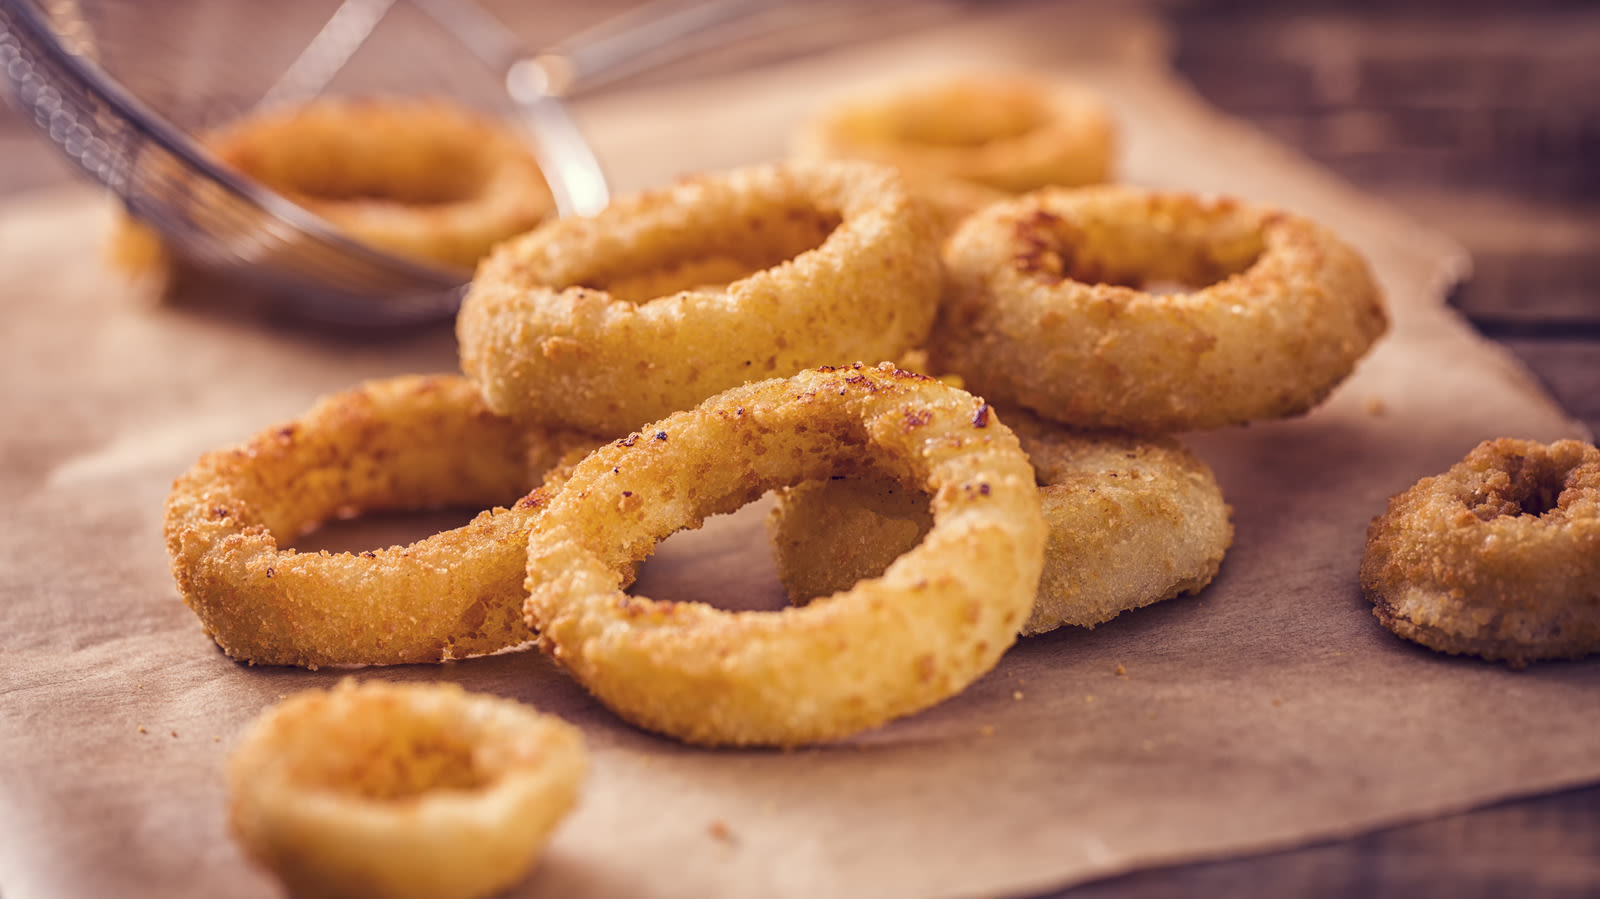 The Absolute Best Onion Rings In The US, According To Customers